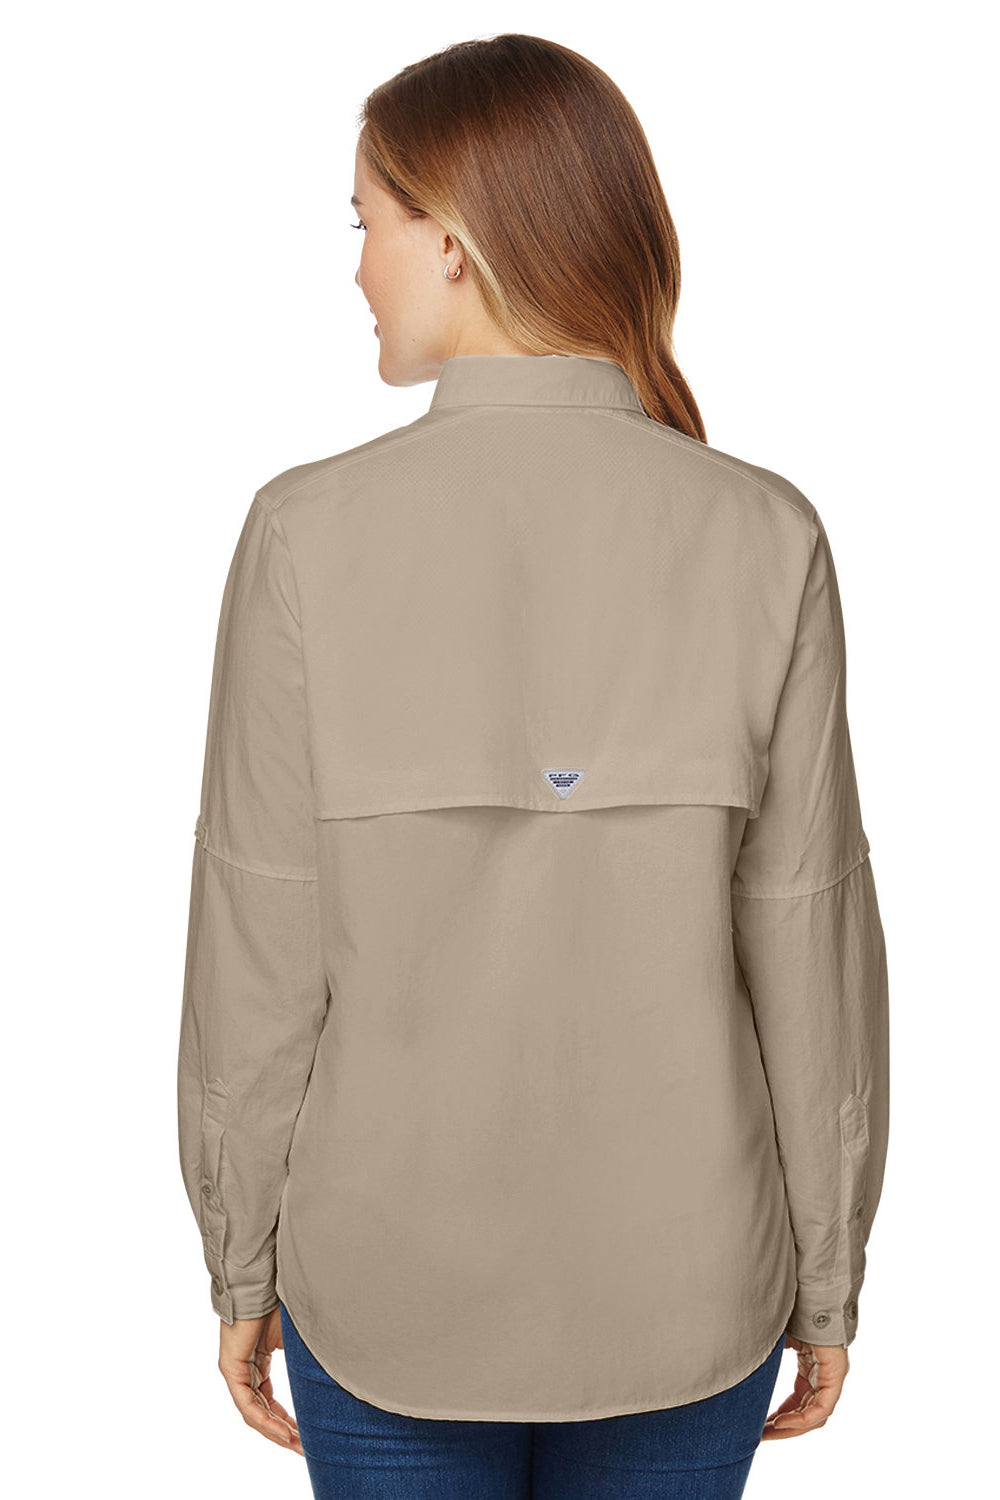 Columbia 7314/139656 Womens Bahama Moisture Wicking Long Sleeve Button Down Shirt w/ Double Pockets Fossil Back